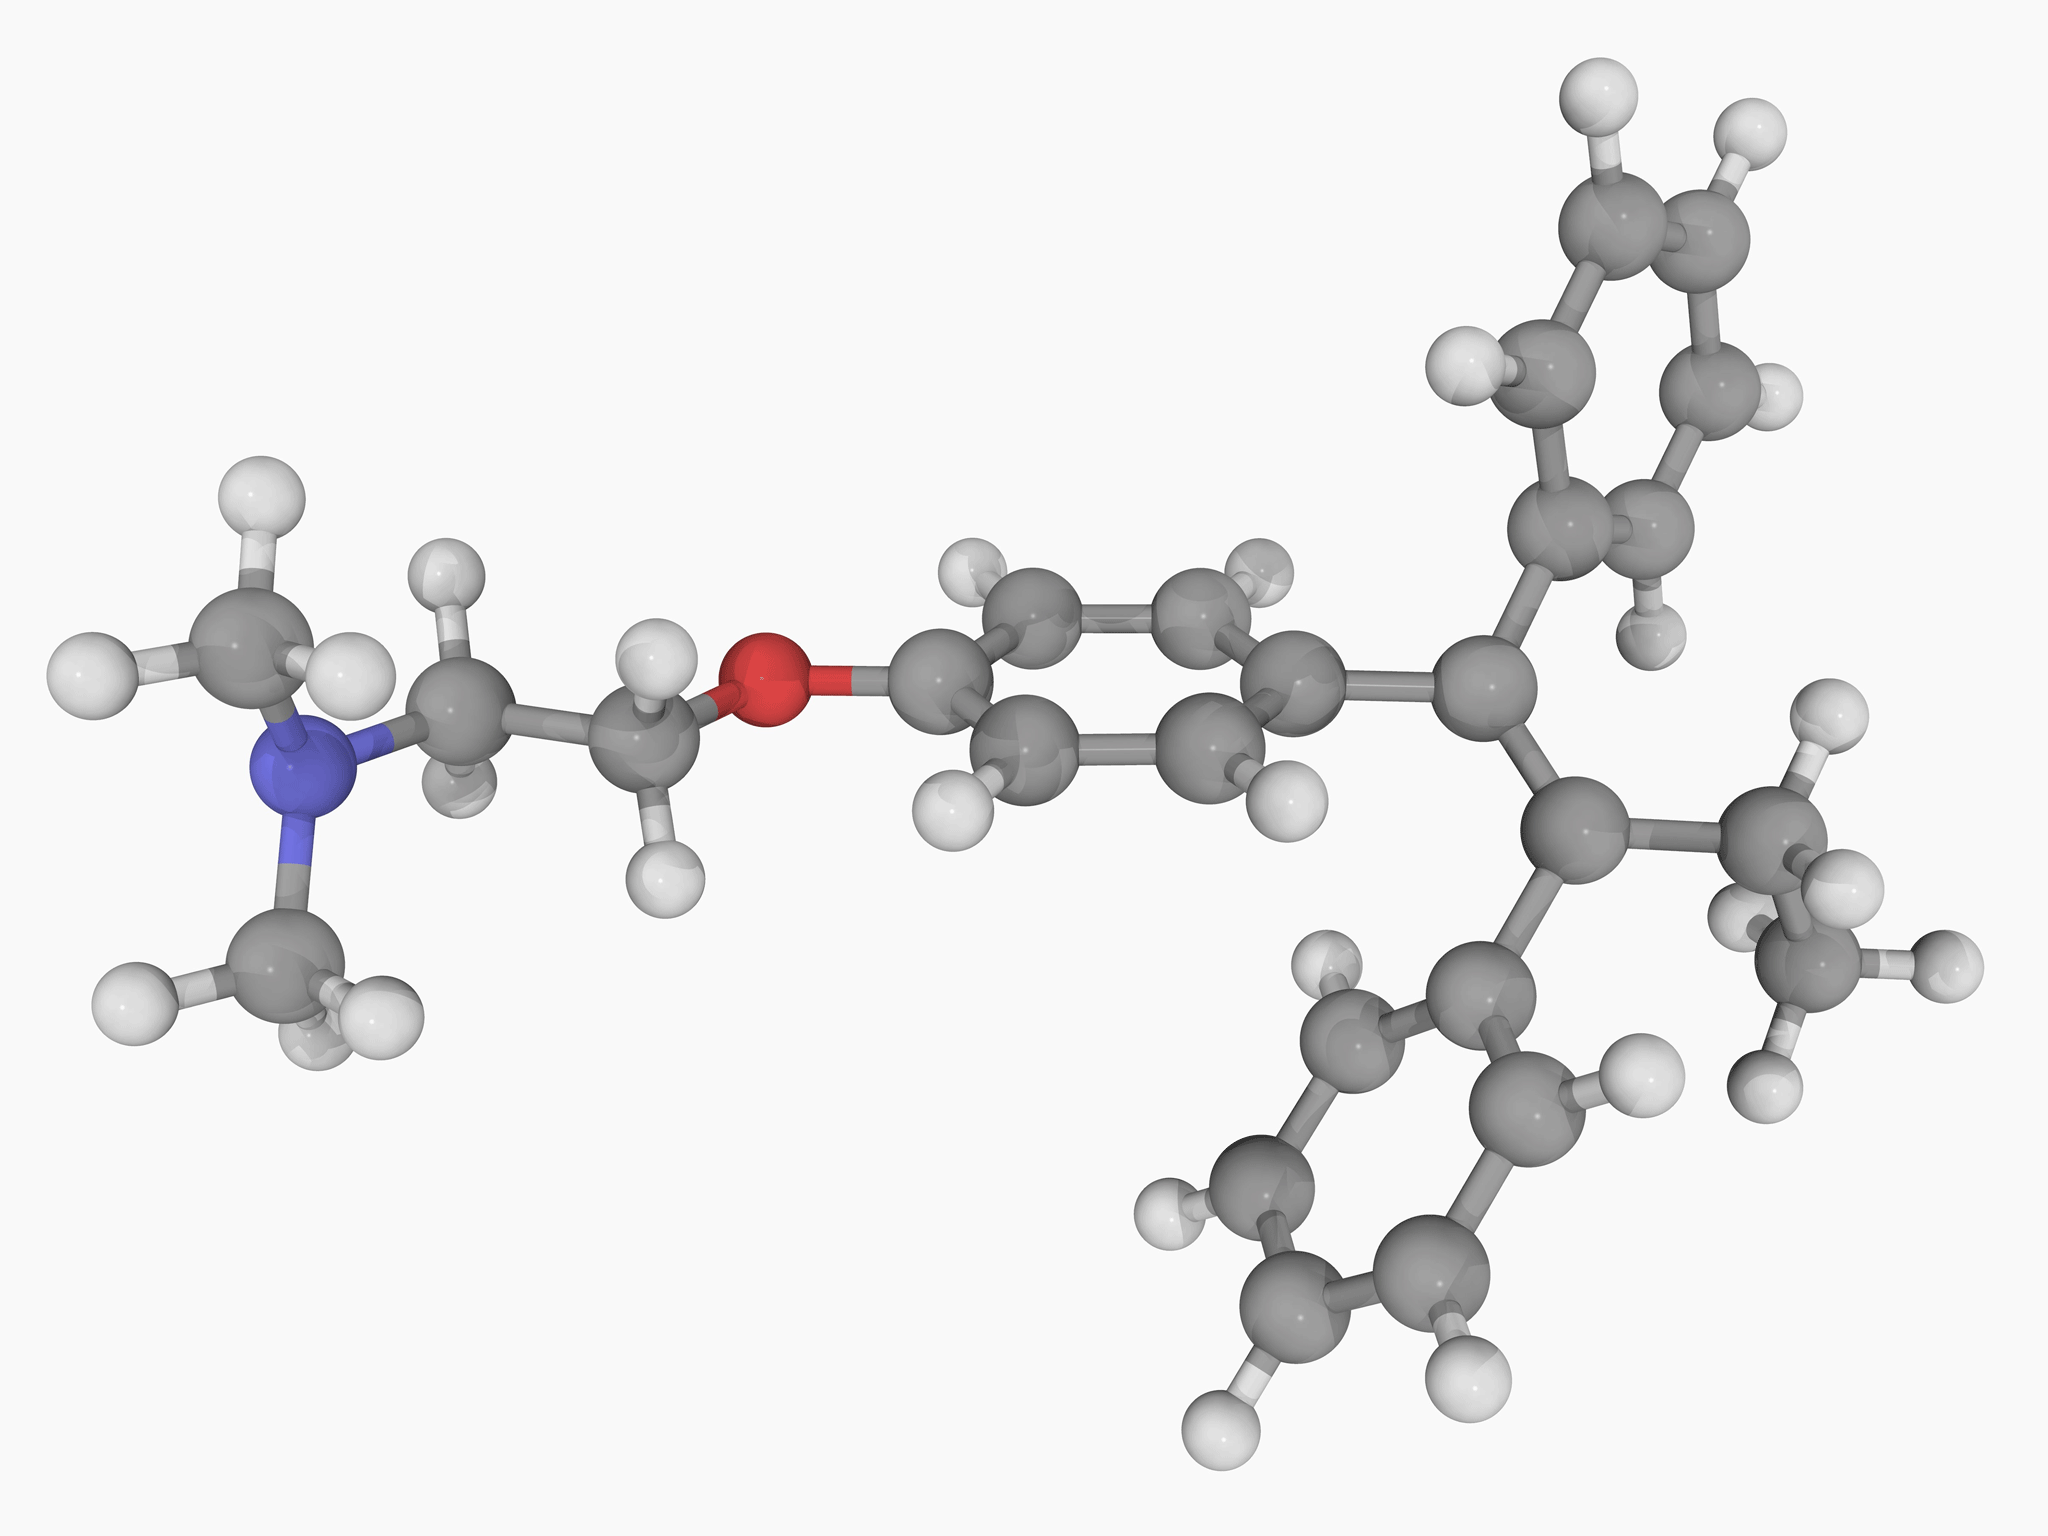 Scientists based in the US have found biological evidence explaining why certain users of the cancer drug Tamoxifen, encounter 'mental fogginess'. A molecular model of the drug is seen here